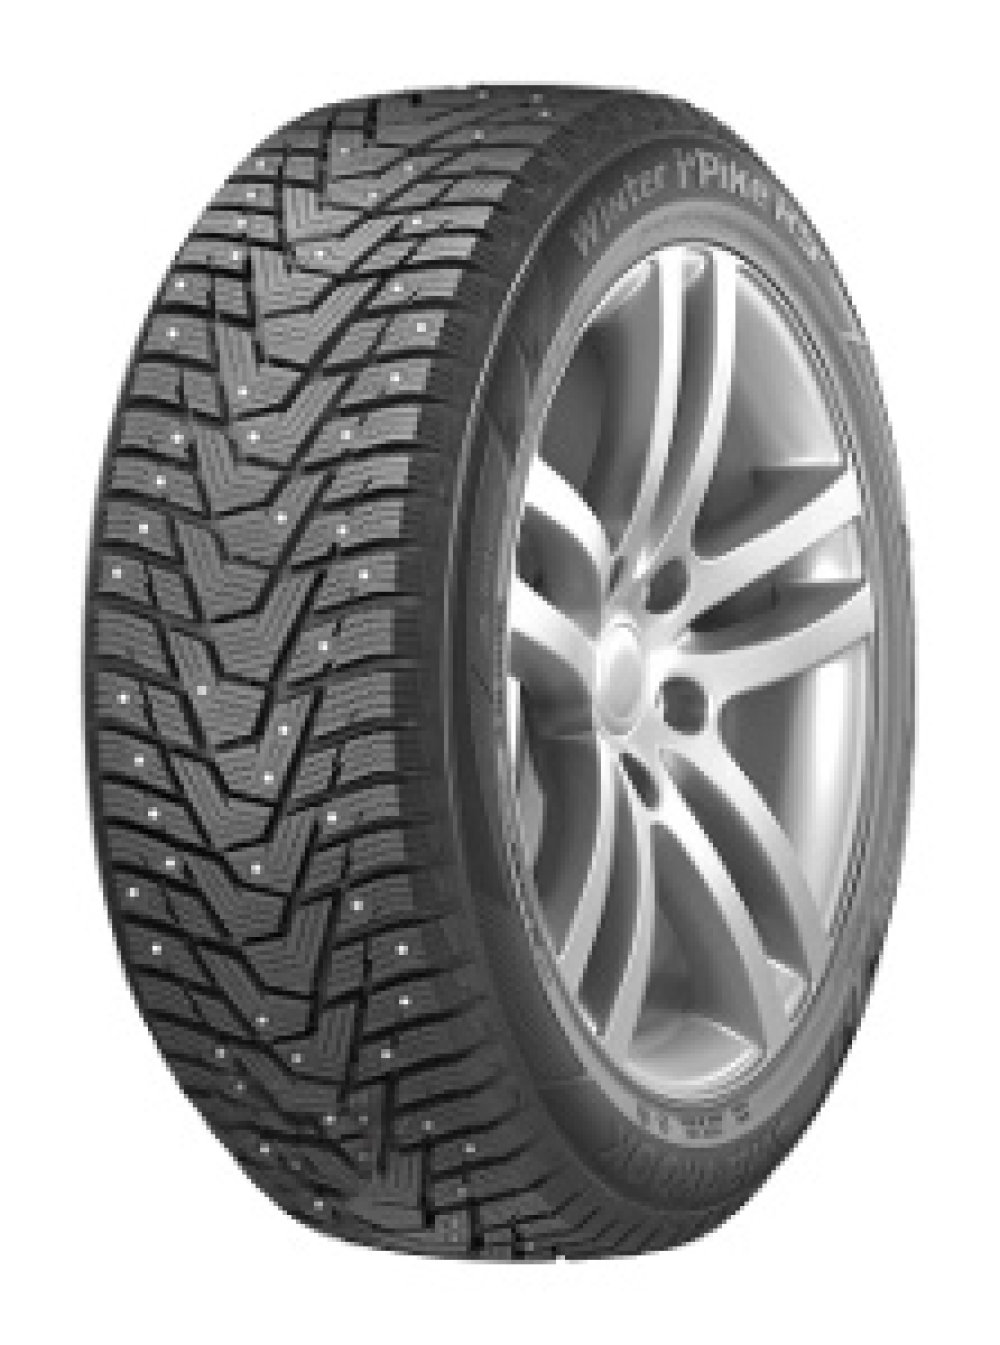 Image of Hankook Winter I*Pike RS2 W429 ( 195/65 R15 95T XL, pneumatico chiodato SBL )